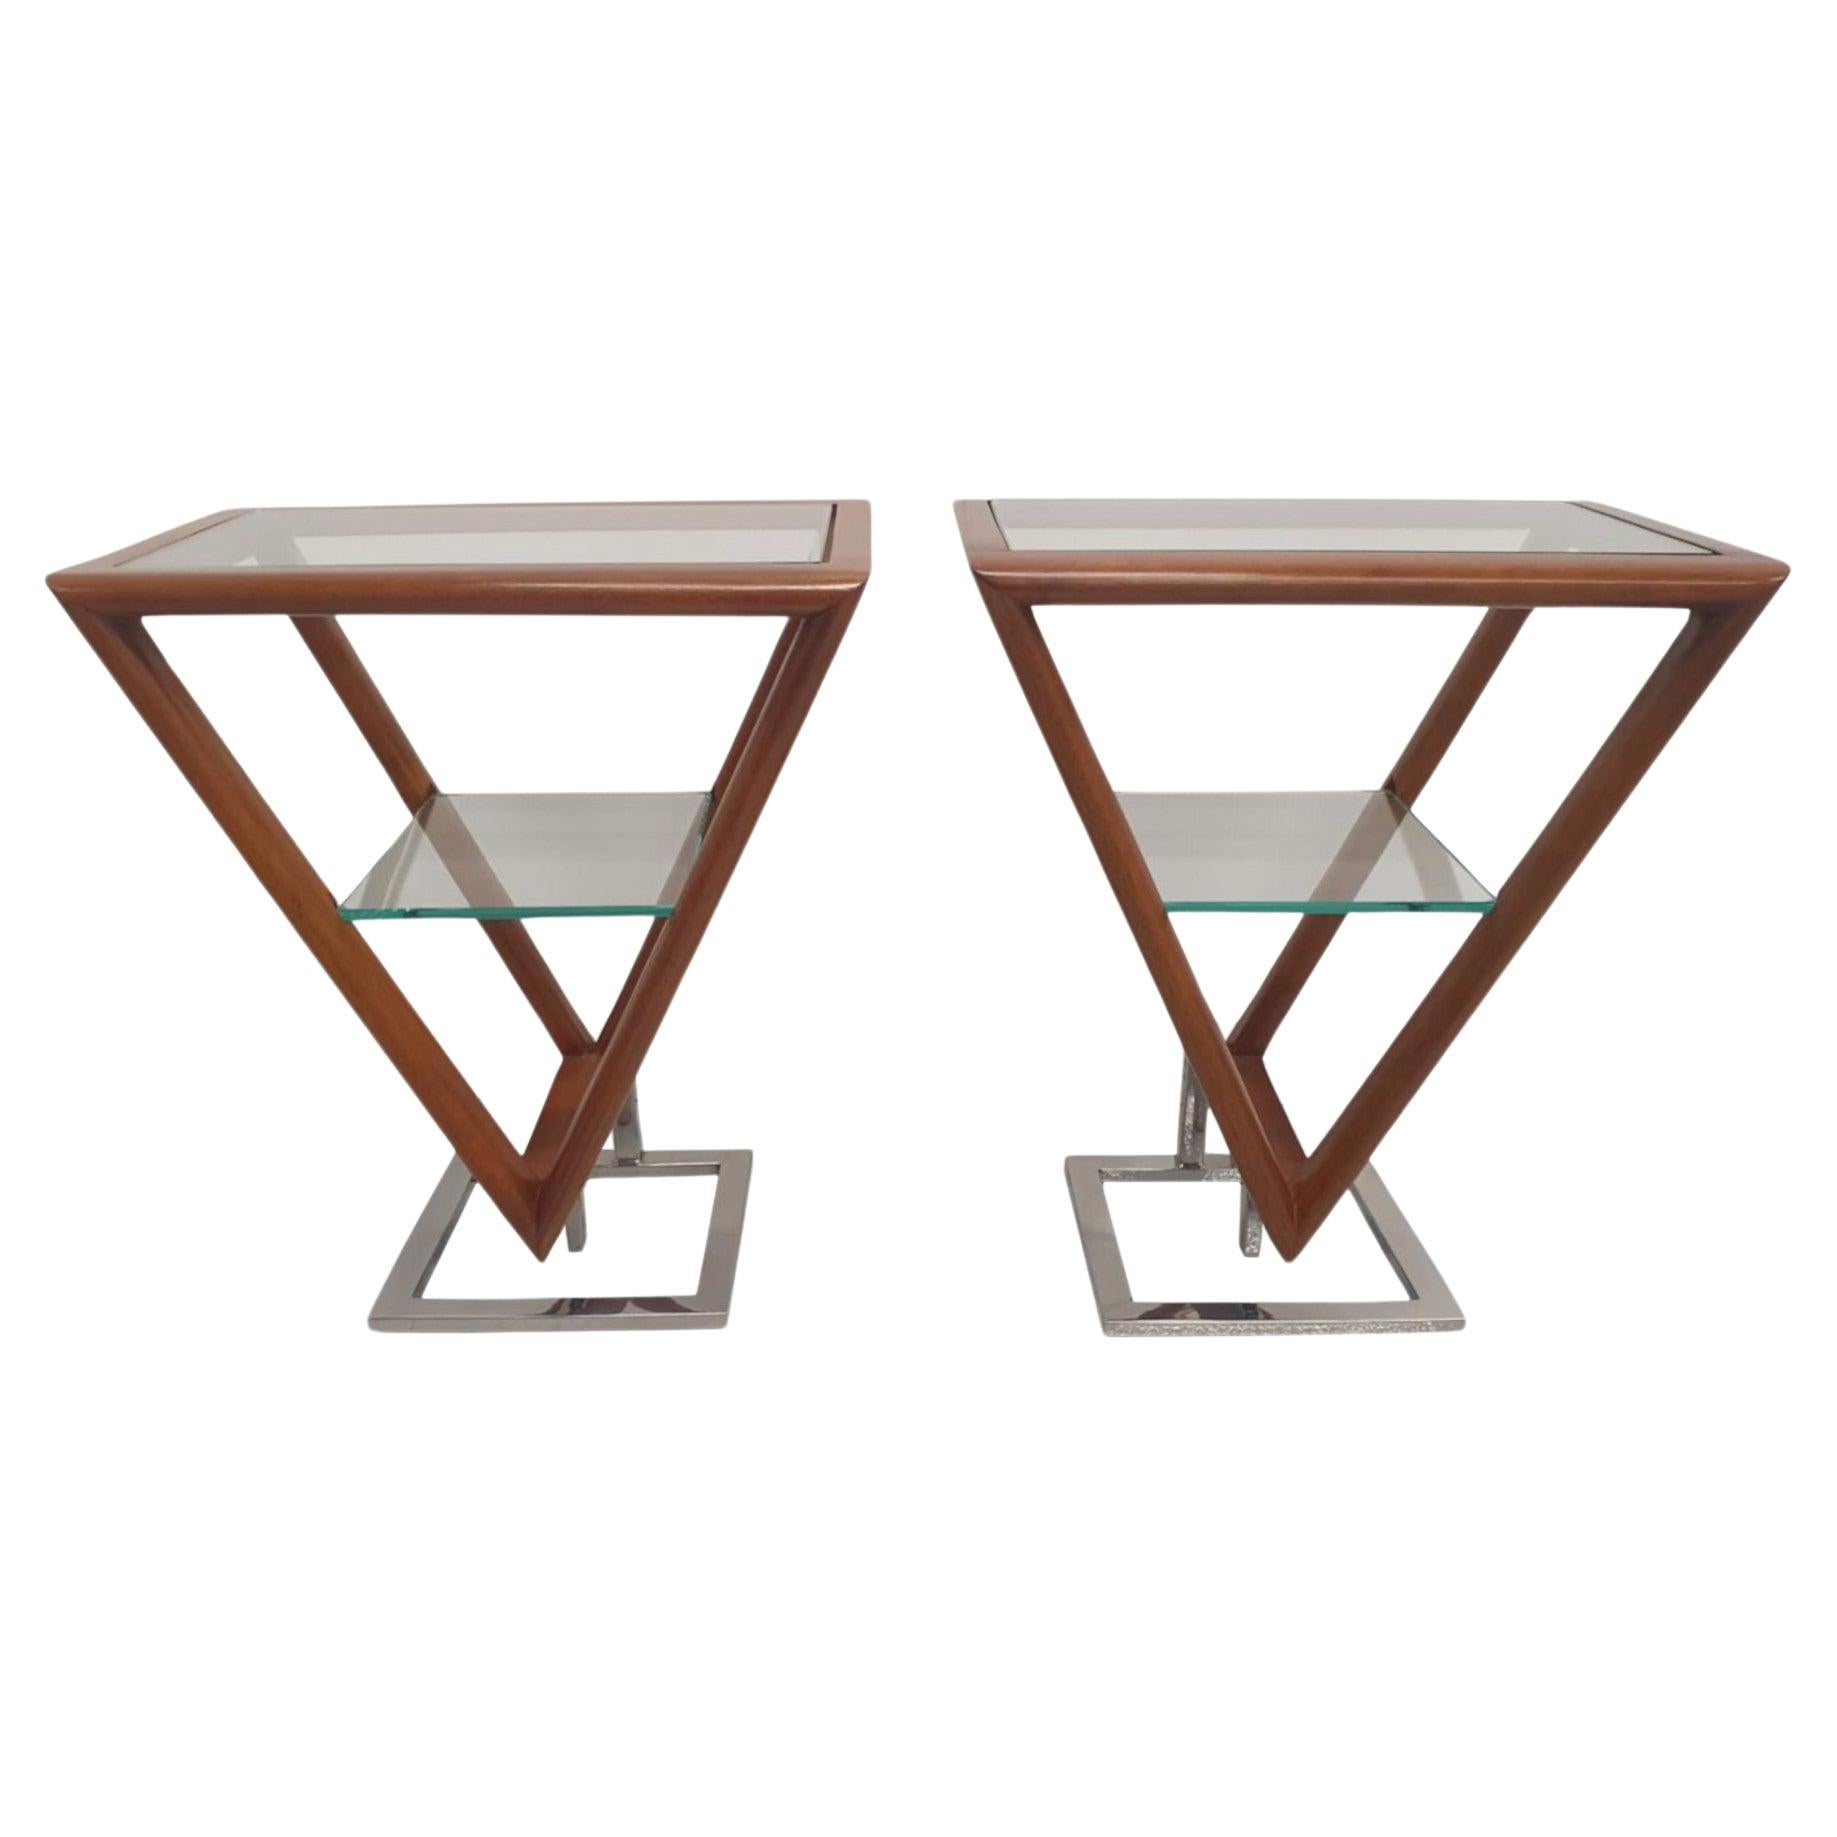 A Stunning Pair of Side Tables in the Art Deco Design For Sale